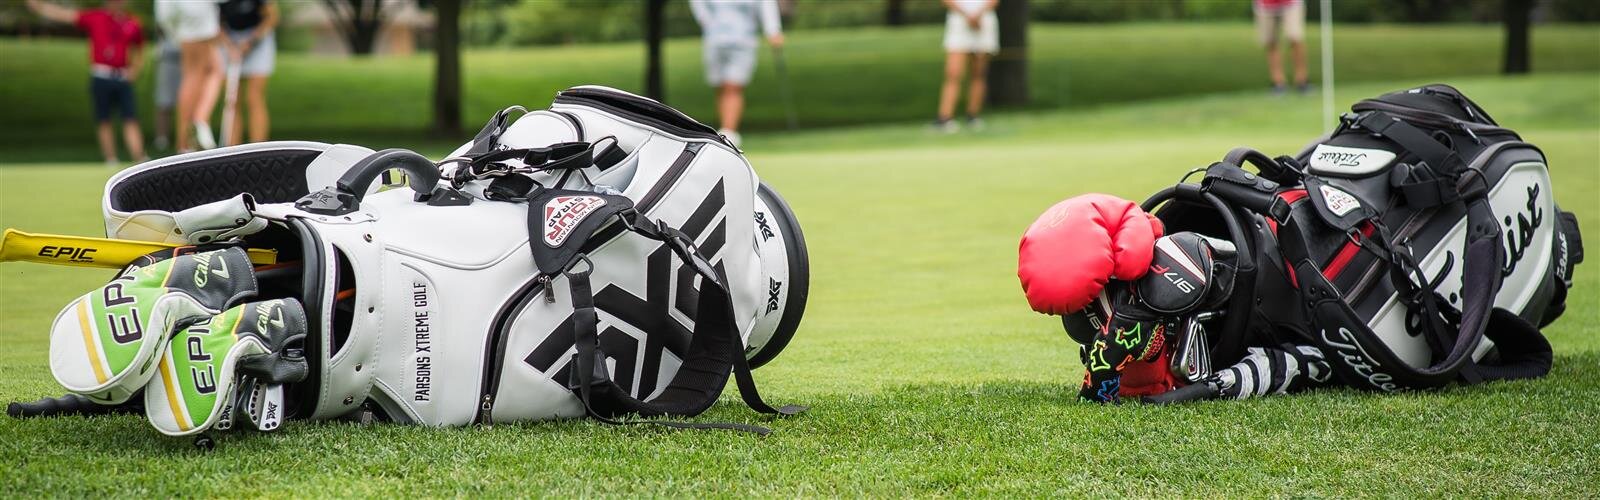 The 2019 Dow GLBI event welcomed 144 golfers and was supported by more than 800 volunteers.